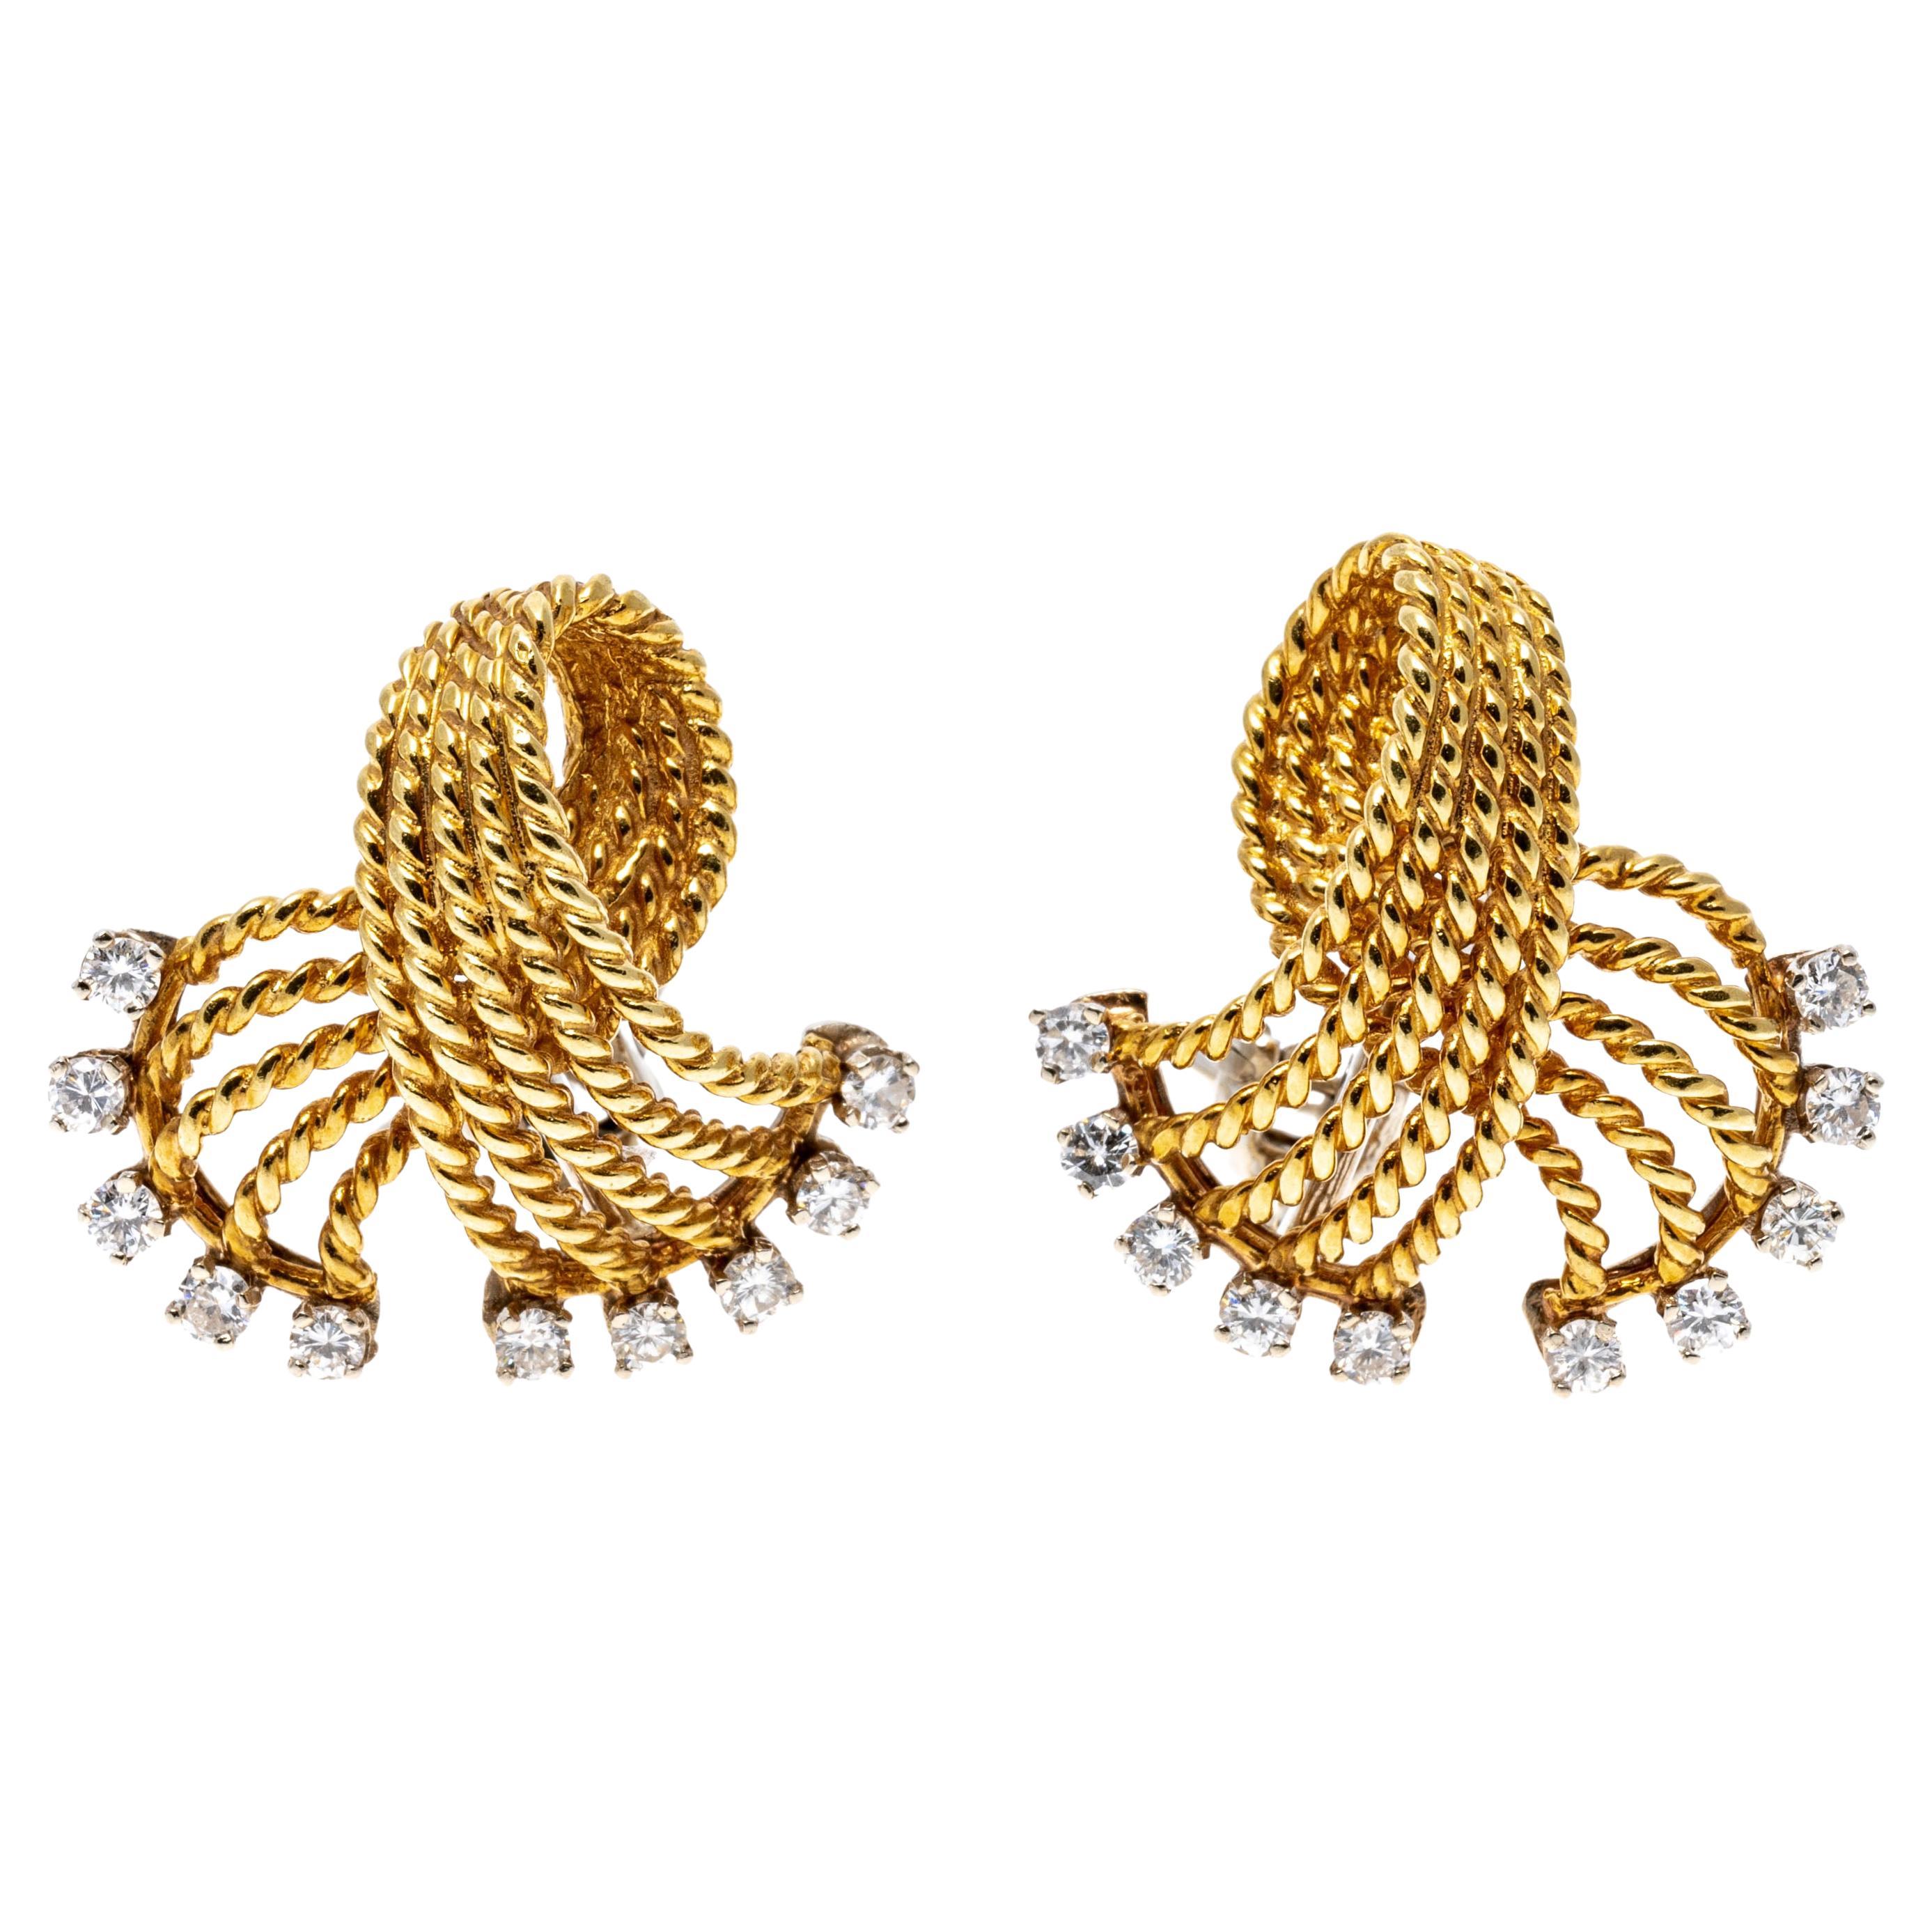 18K Yellow Gold Braided Folded Knot Earrings with Diamonds, App. 0.50 TCW